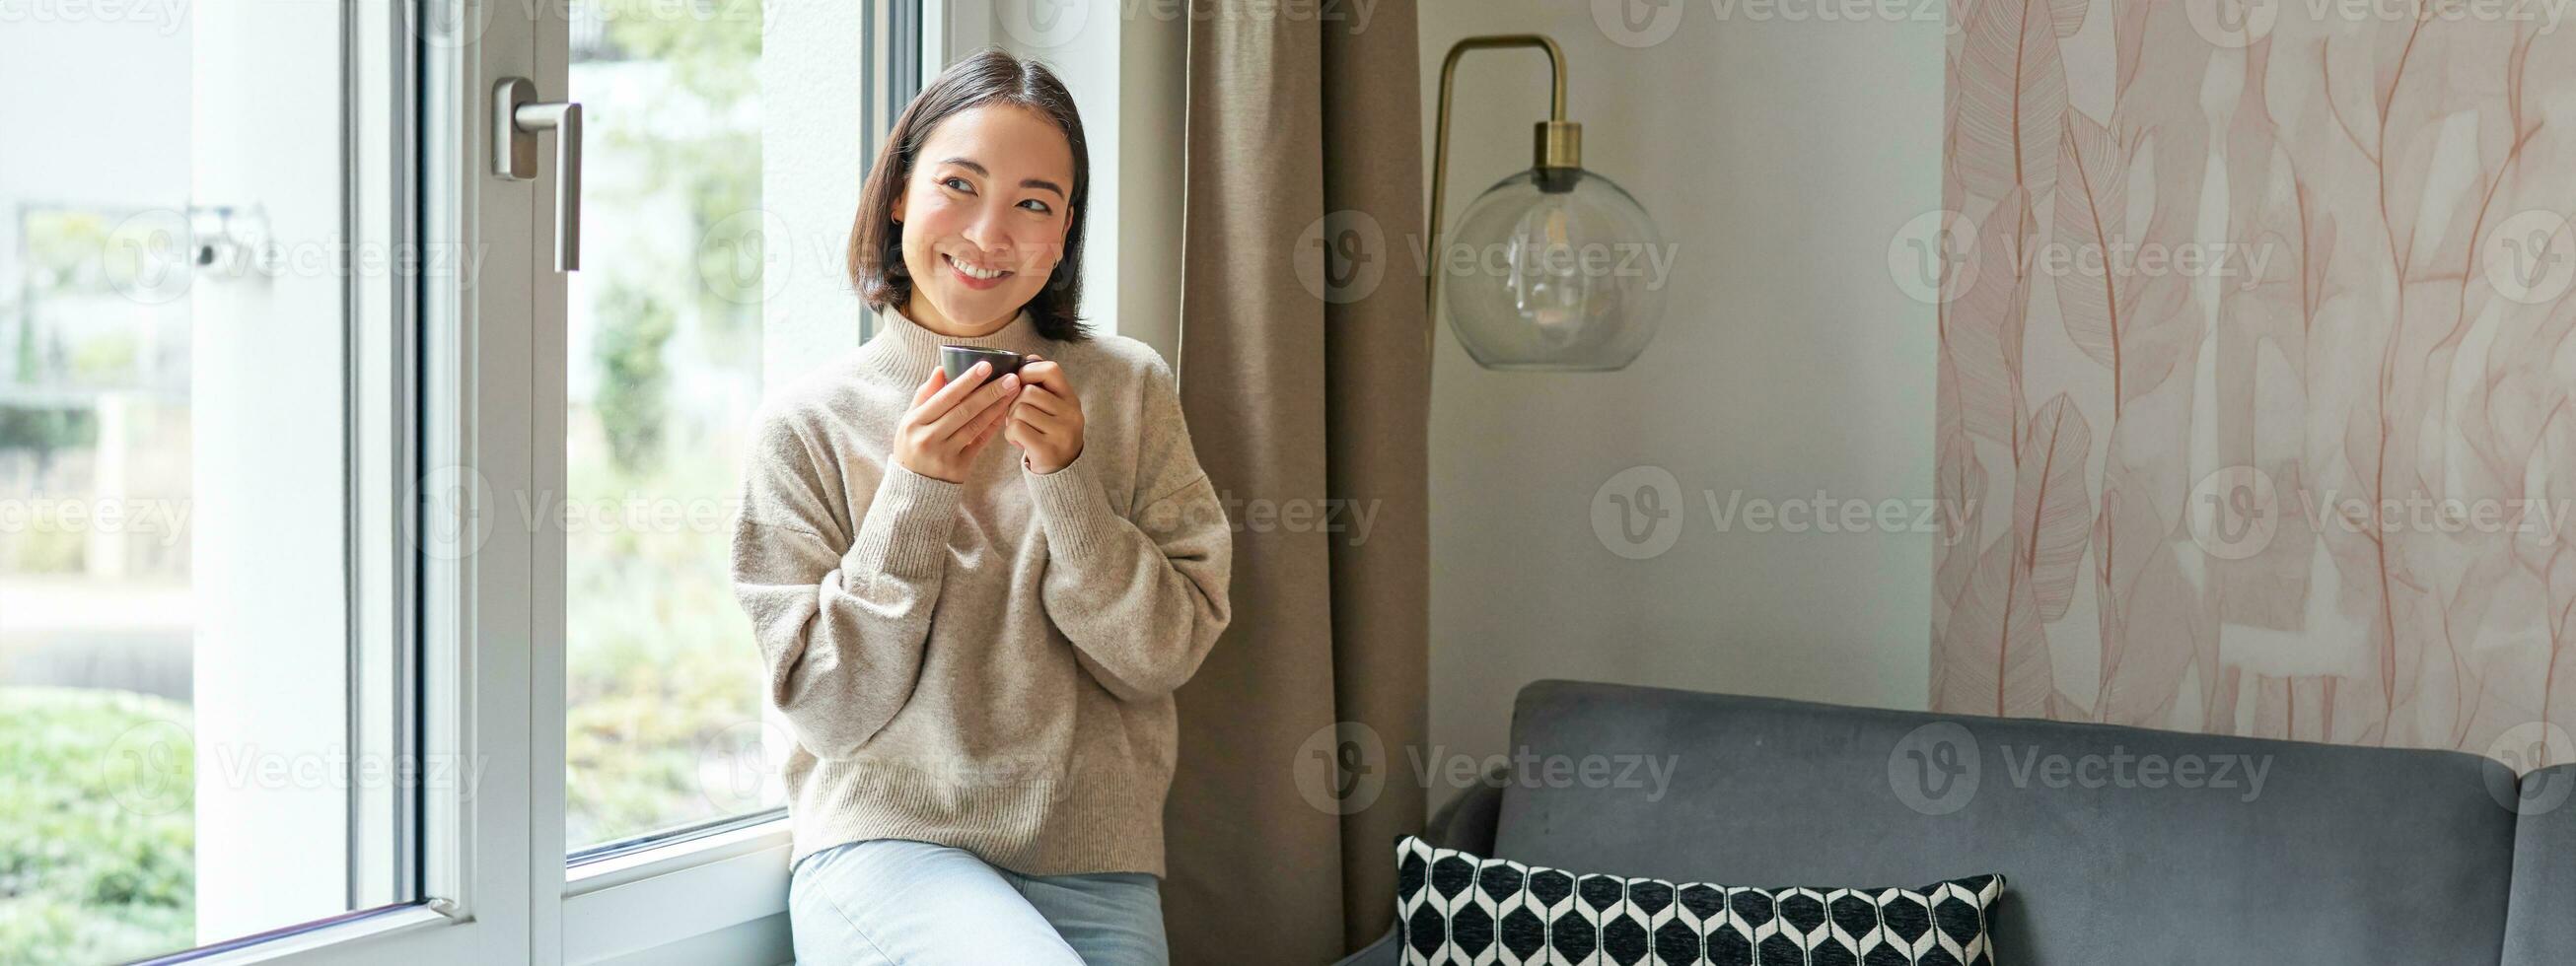 Beautiful young asian woman sitting near window and drinking her coffee, holding espresso cup and looking outside with relaxed, smiling face expression photo